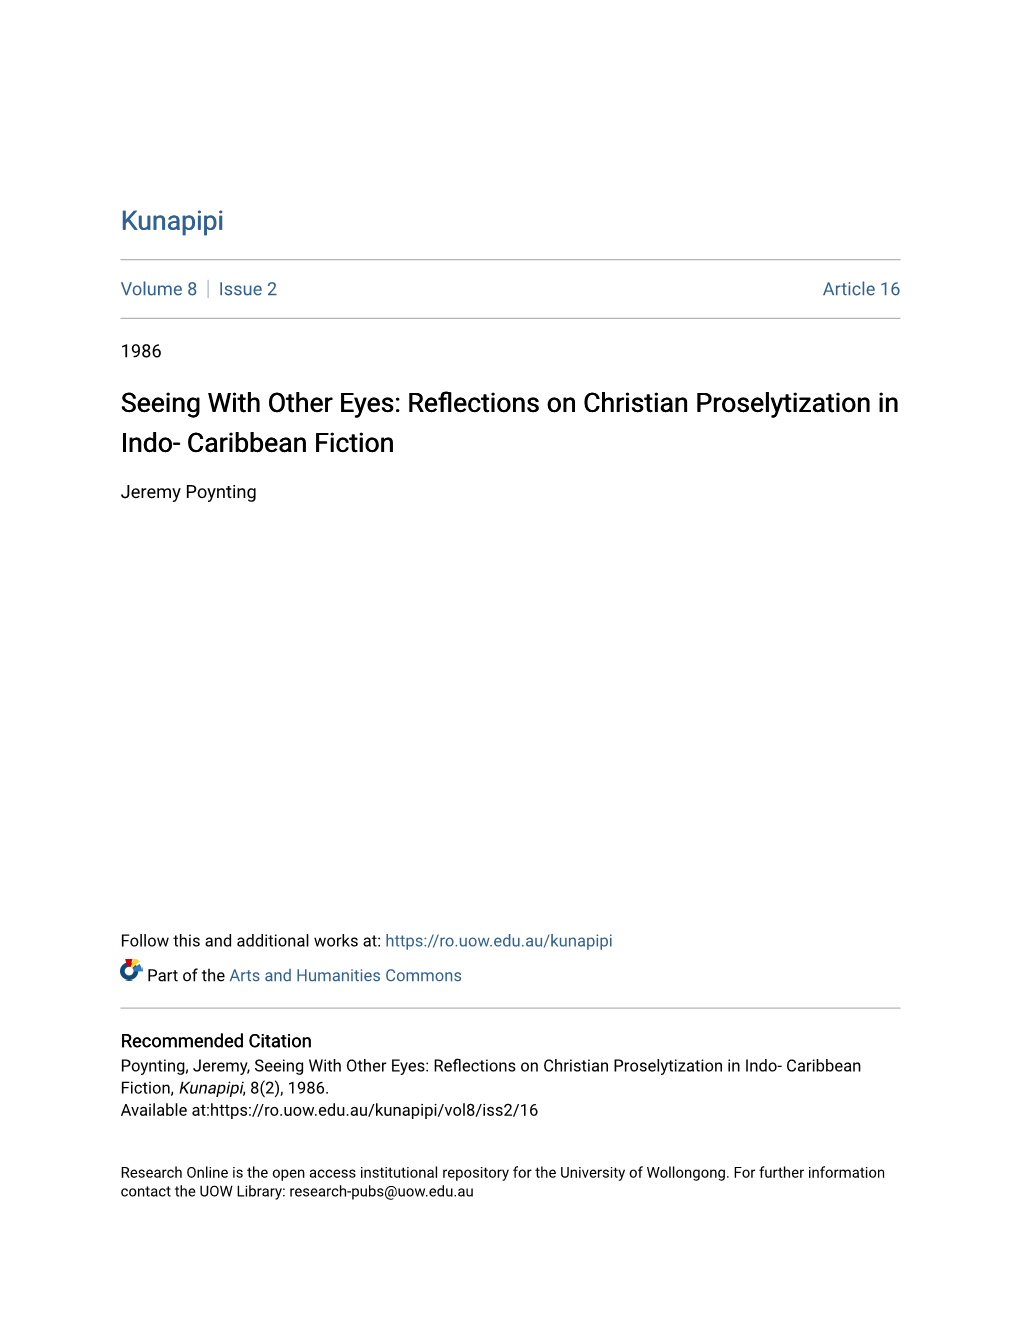 Reflections on Christian Proselytization in Indo- Caribbean Fiction